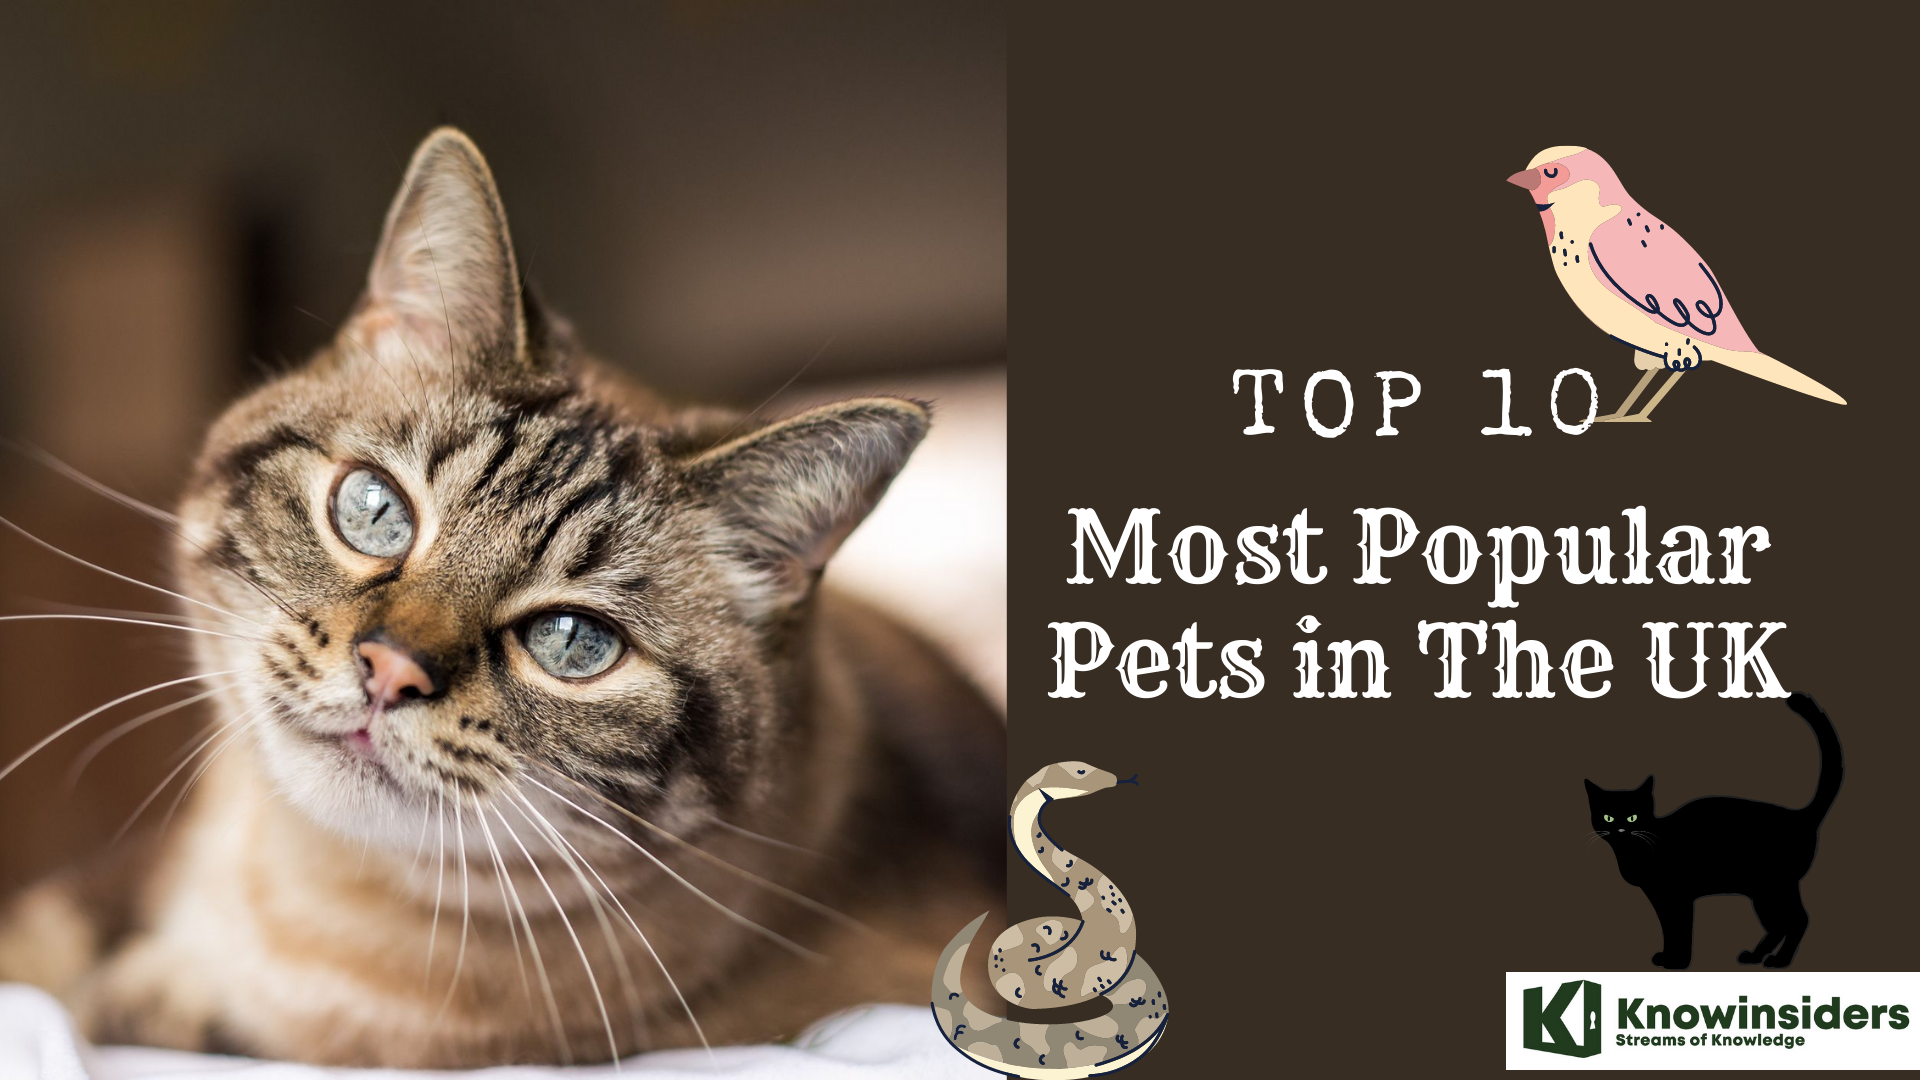 Top 10 most popular pets in the UK 